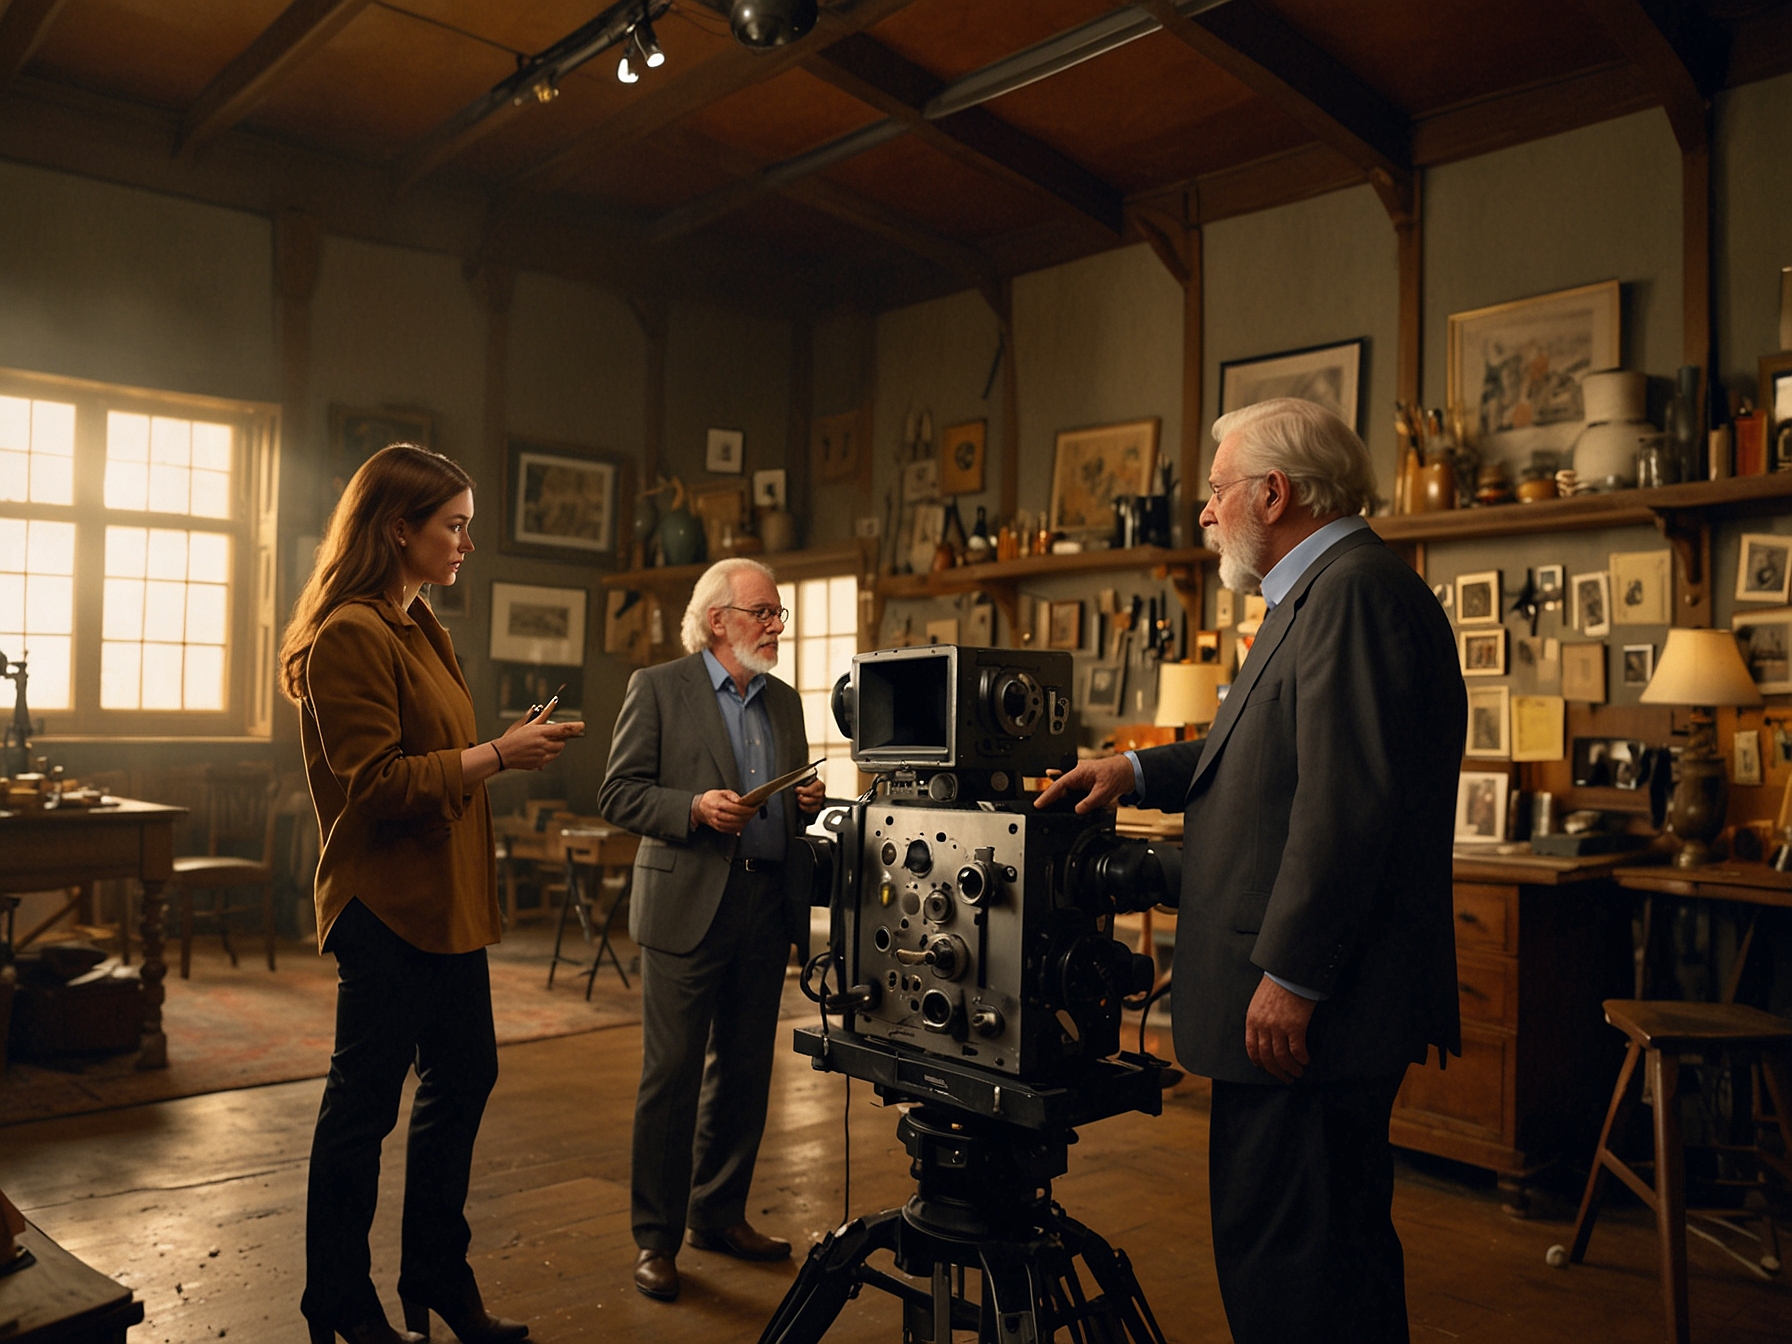 Amber Haley and Donald Sutherland on a movie set, discussing the finer points of set design. The atmosphere is busy, filled with film equipment, showcasing the collaborative spirit of the industry.